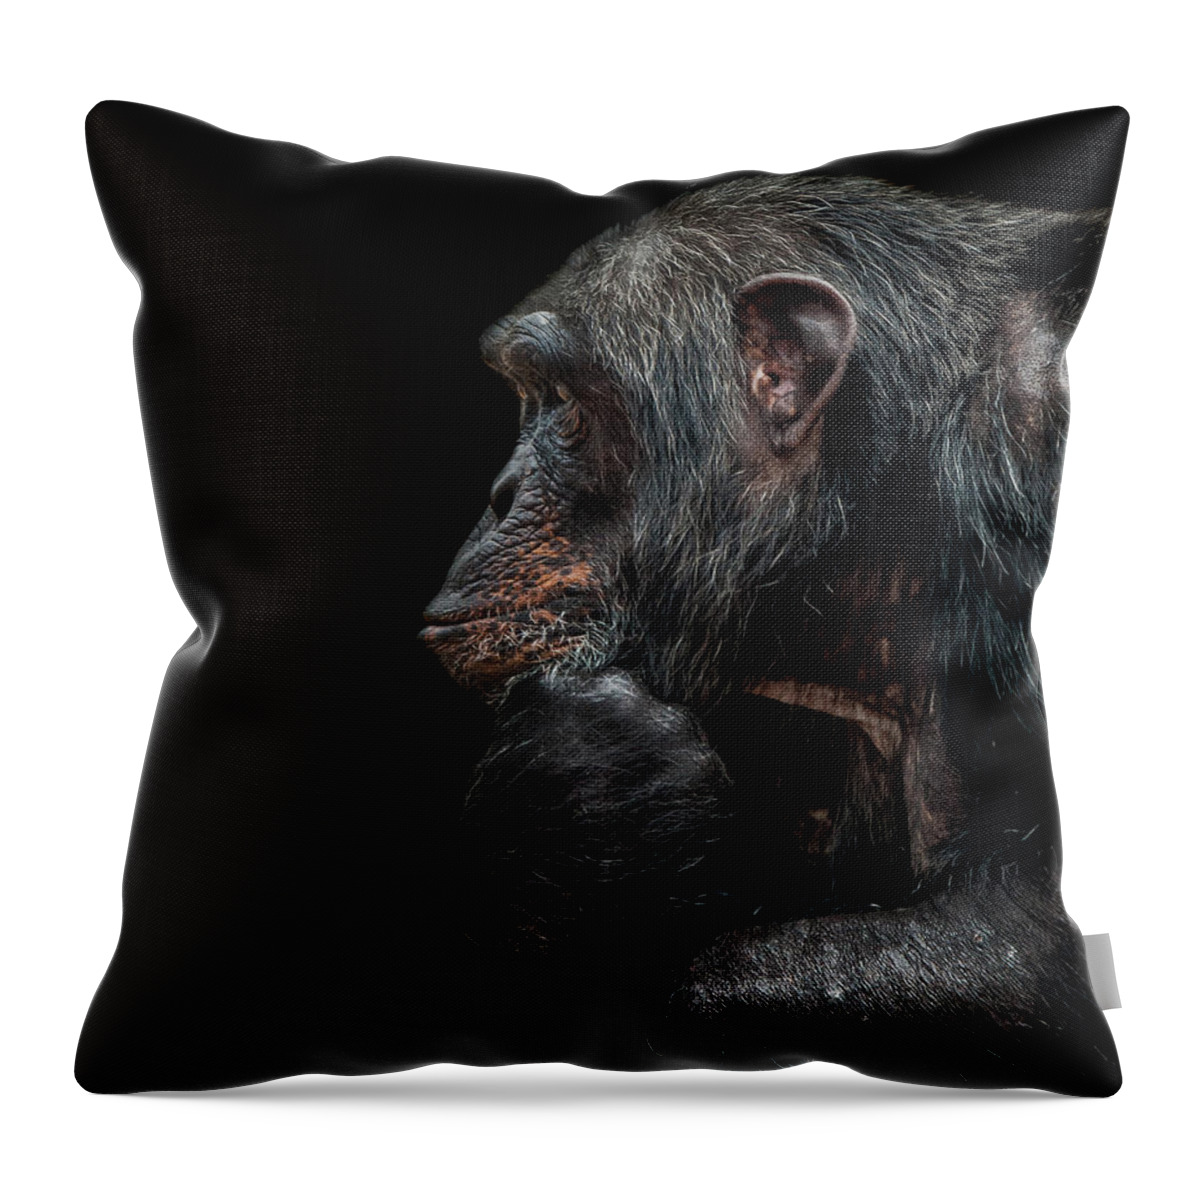 Chimpanzee Throw Pillow featuring the photograph Contemplation #1 by Paul Neville